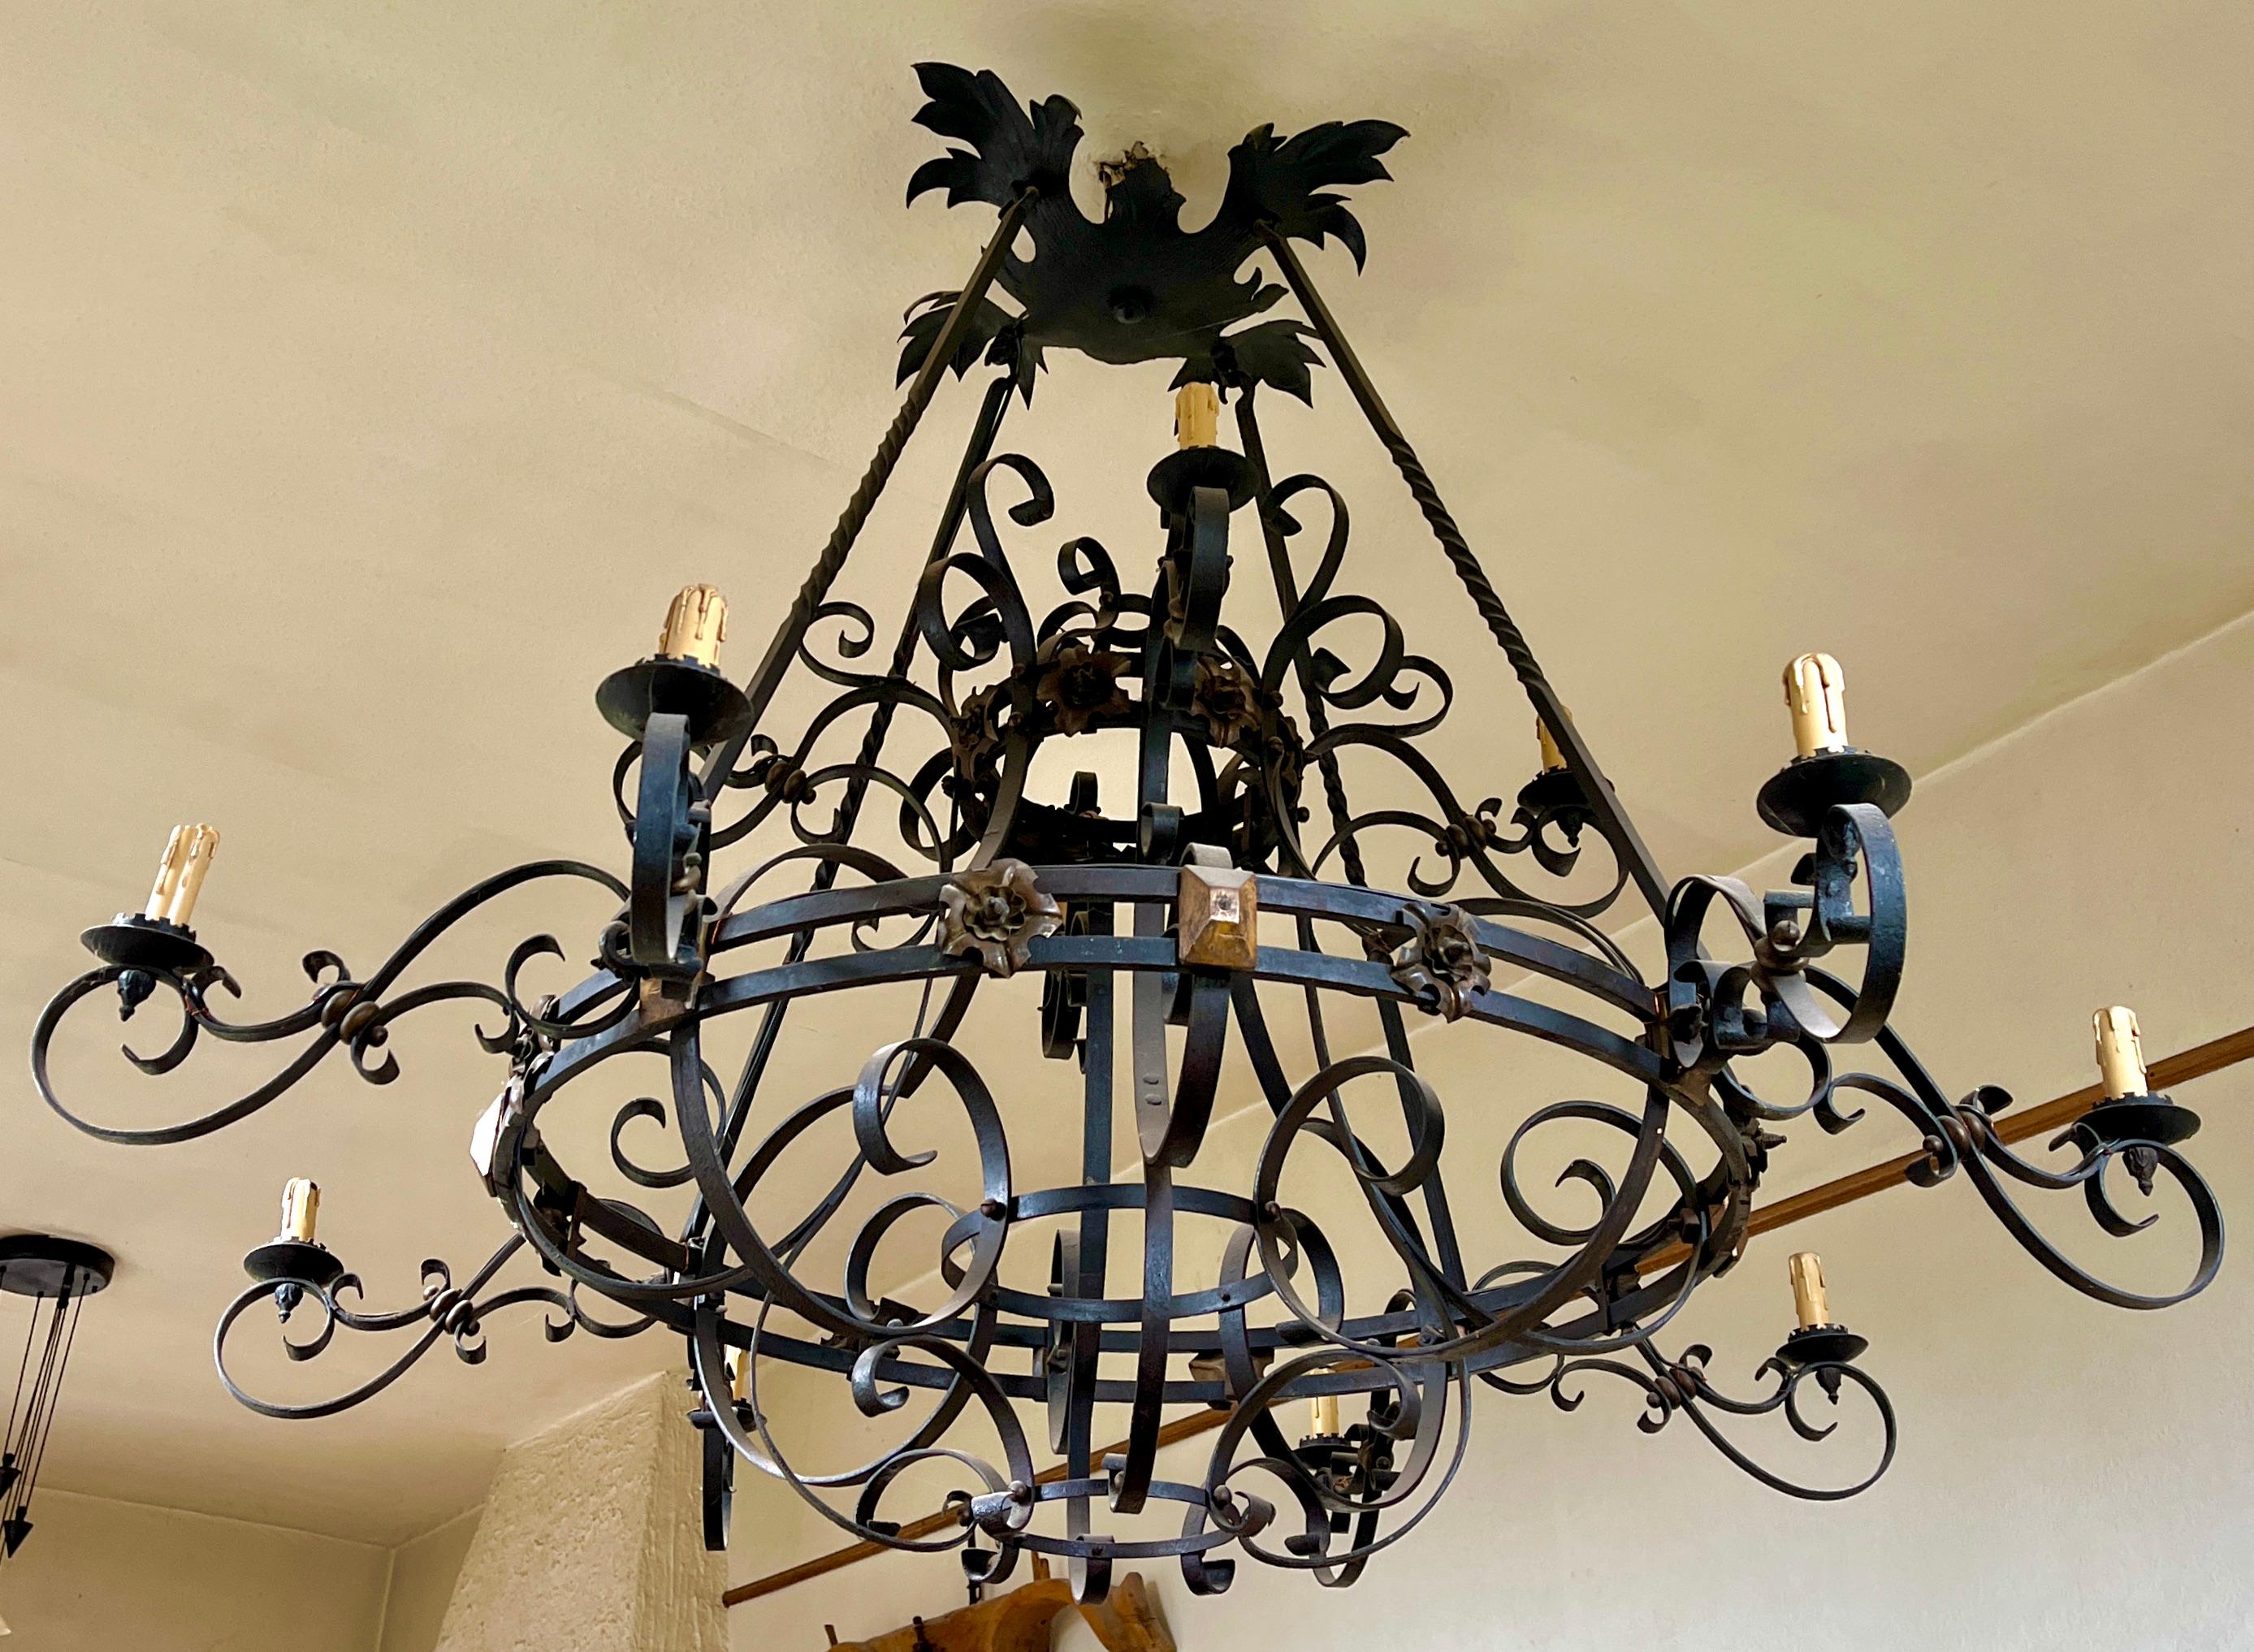 Art Nouveau forget metal chandelier 1900s.
Photography fails to capture the simple elegant illumination provided by this lamp.

In Good condition and provided with 12 fittings E14
Can only be shipped disassembled in connection with the large